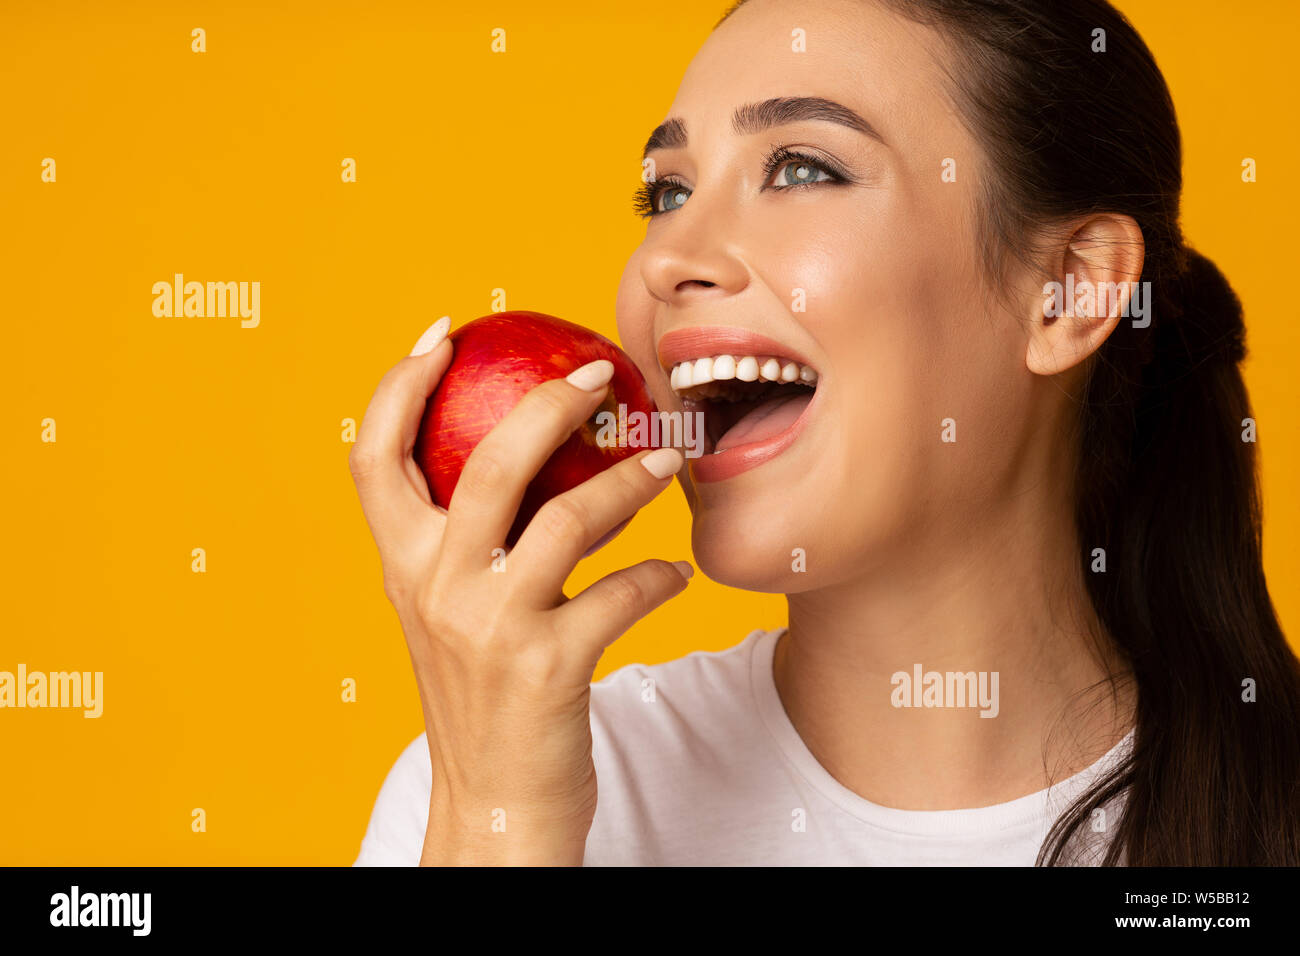 Girl With Perfect White Smile Holding Apple On Yellow Background Stock Photo